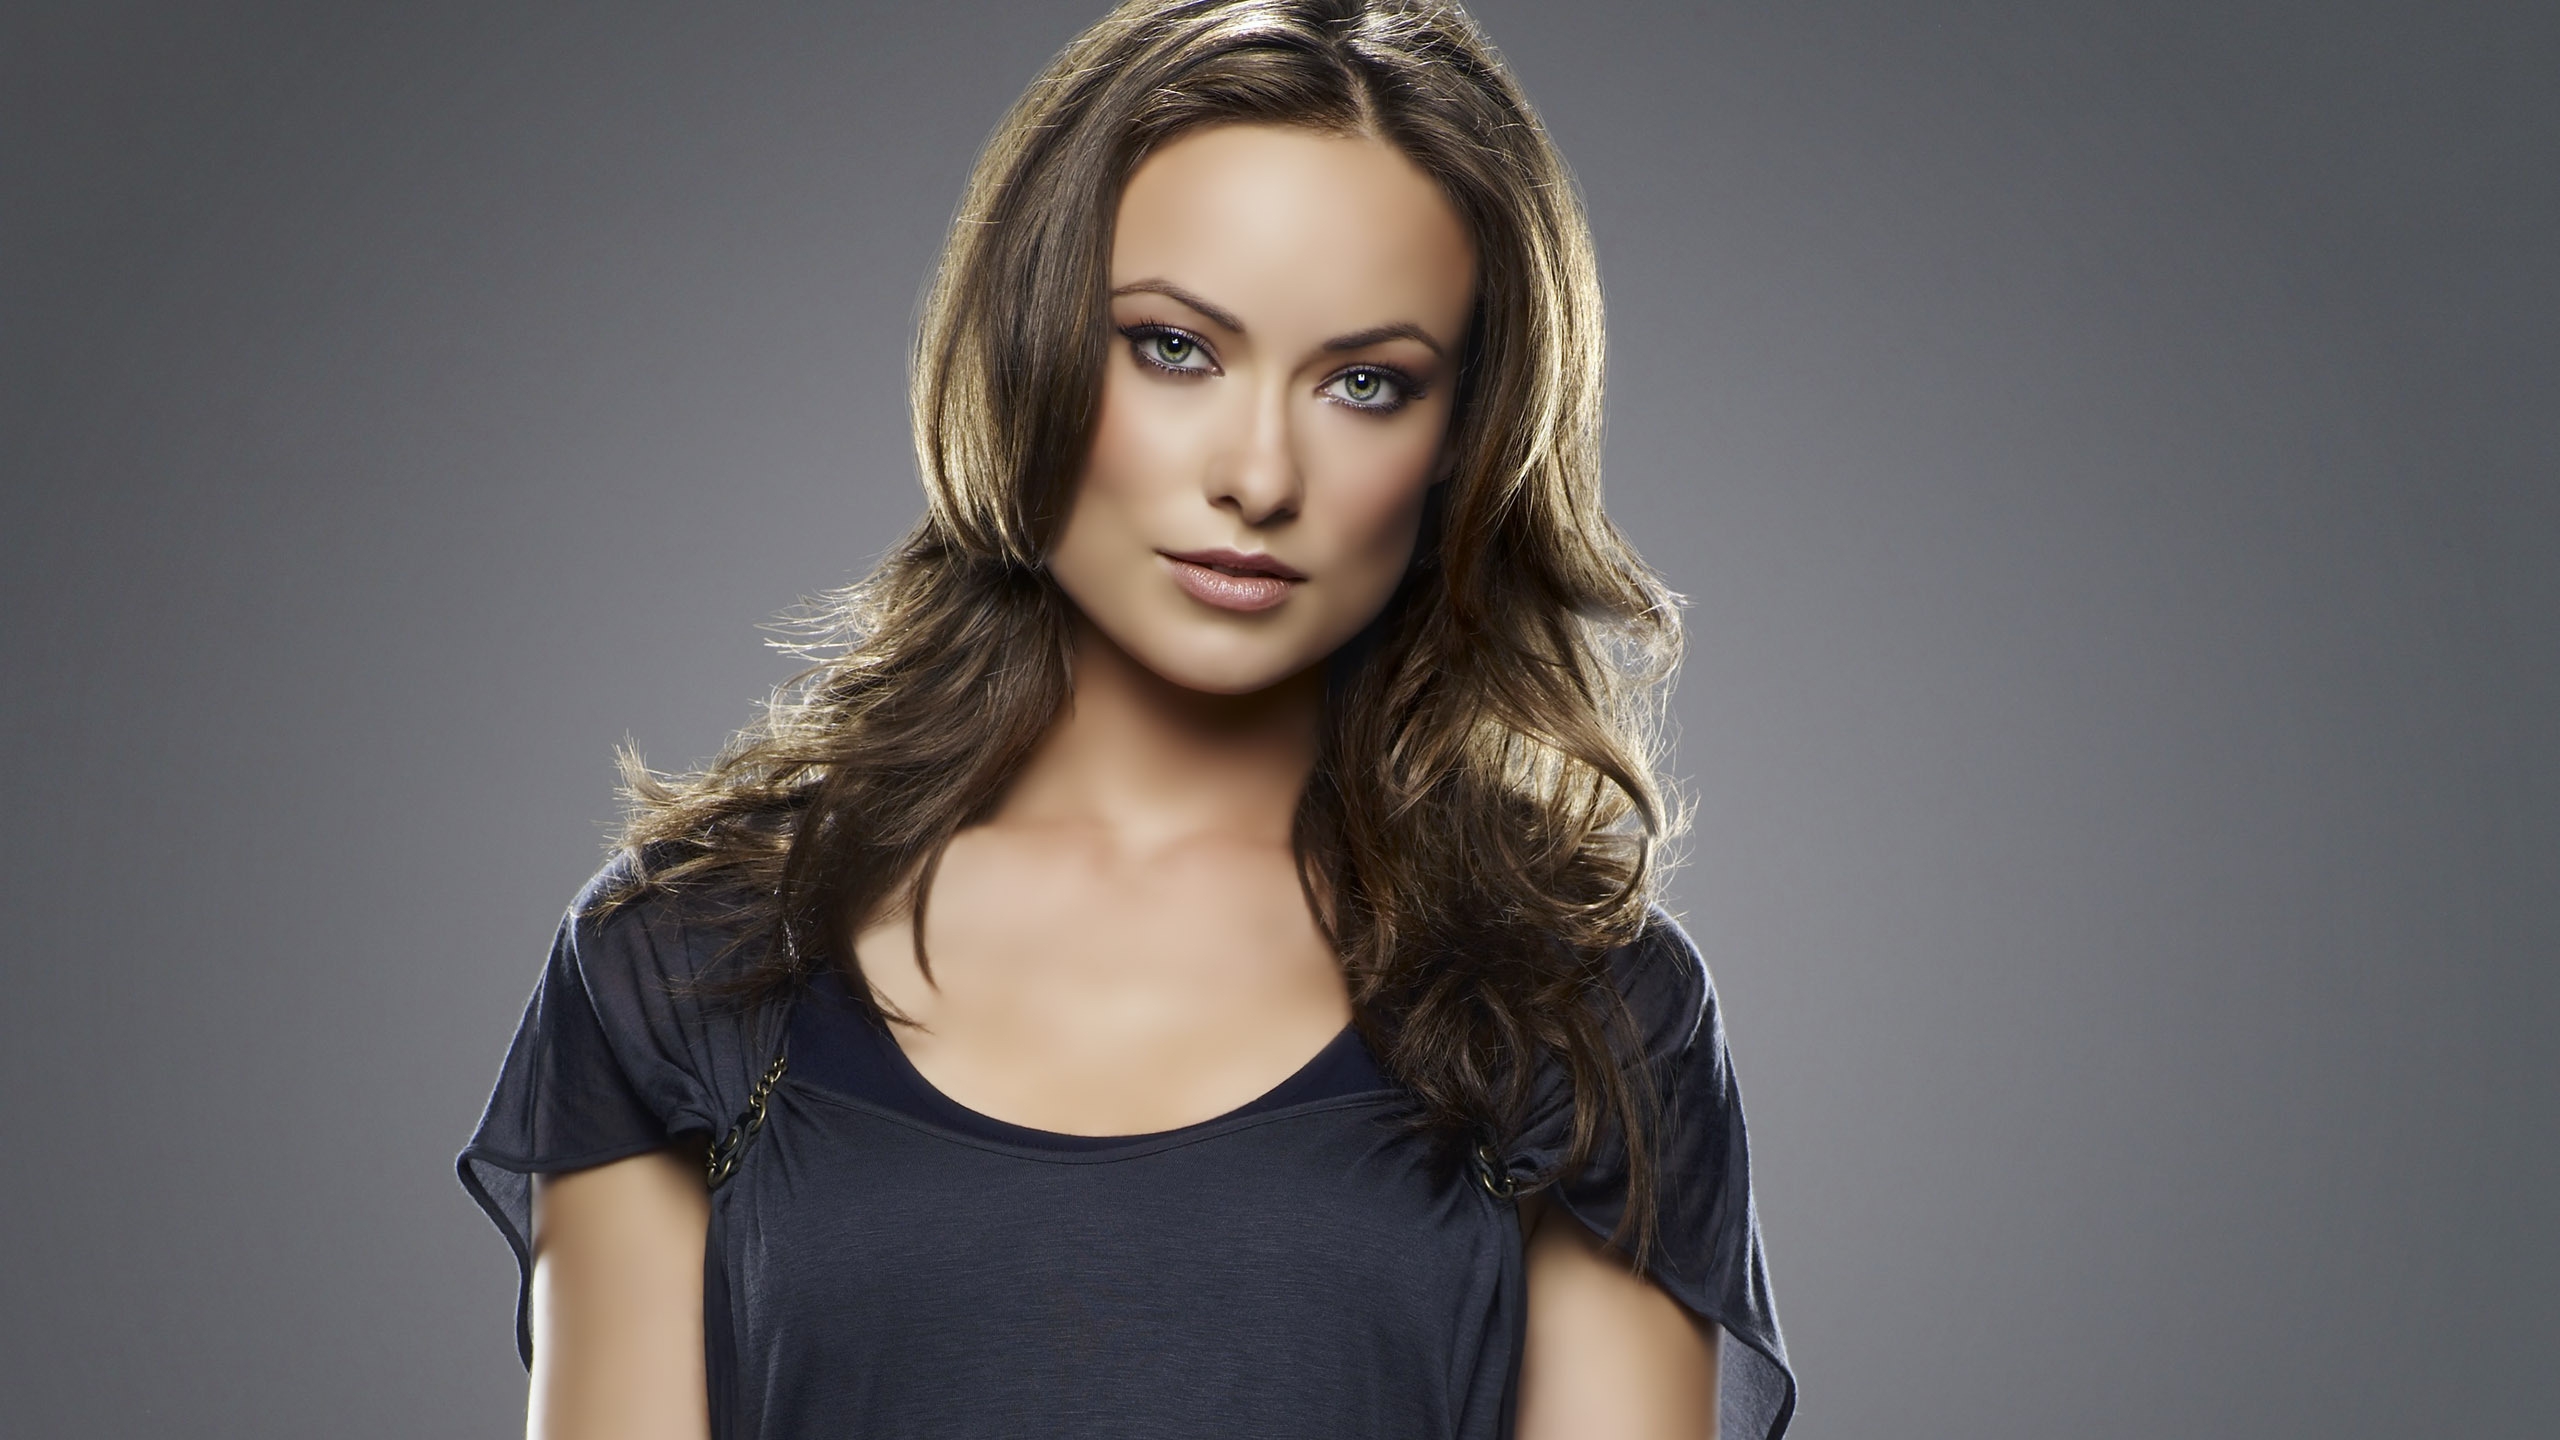 Olivia Wilde Actress for 2560x1440 HDTV resolution